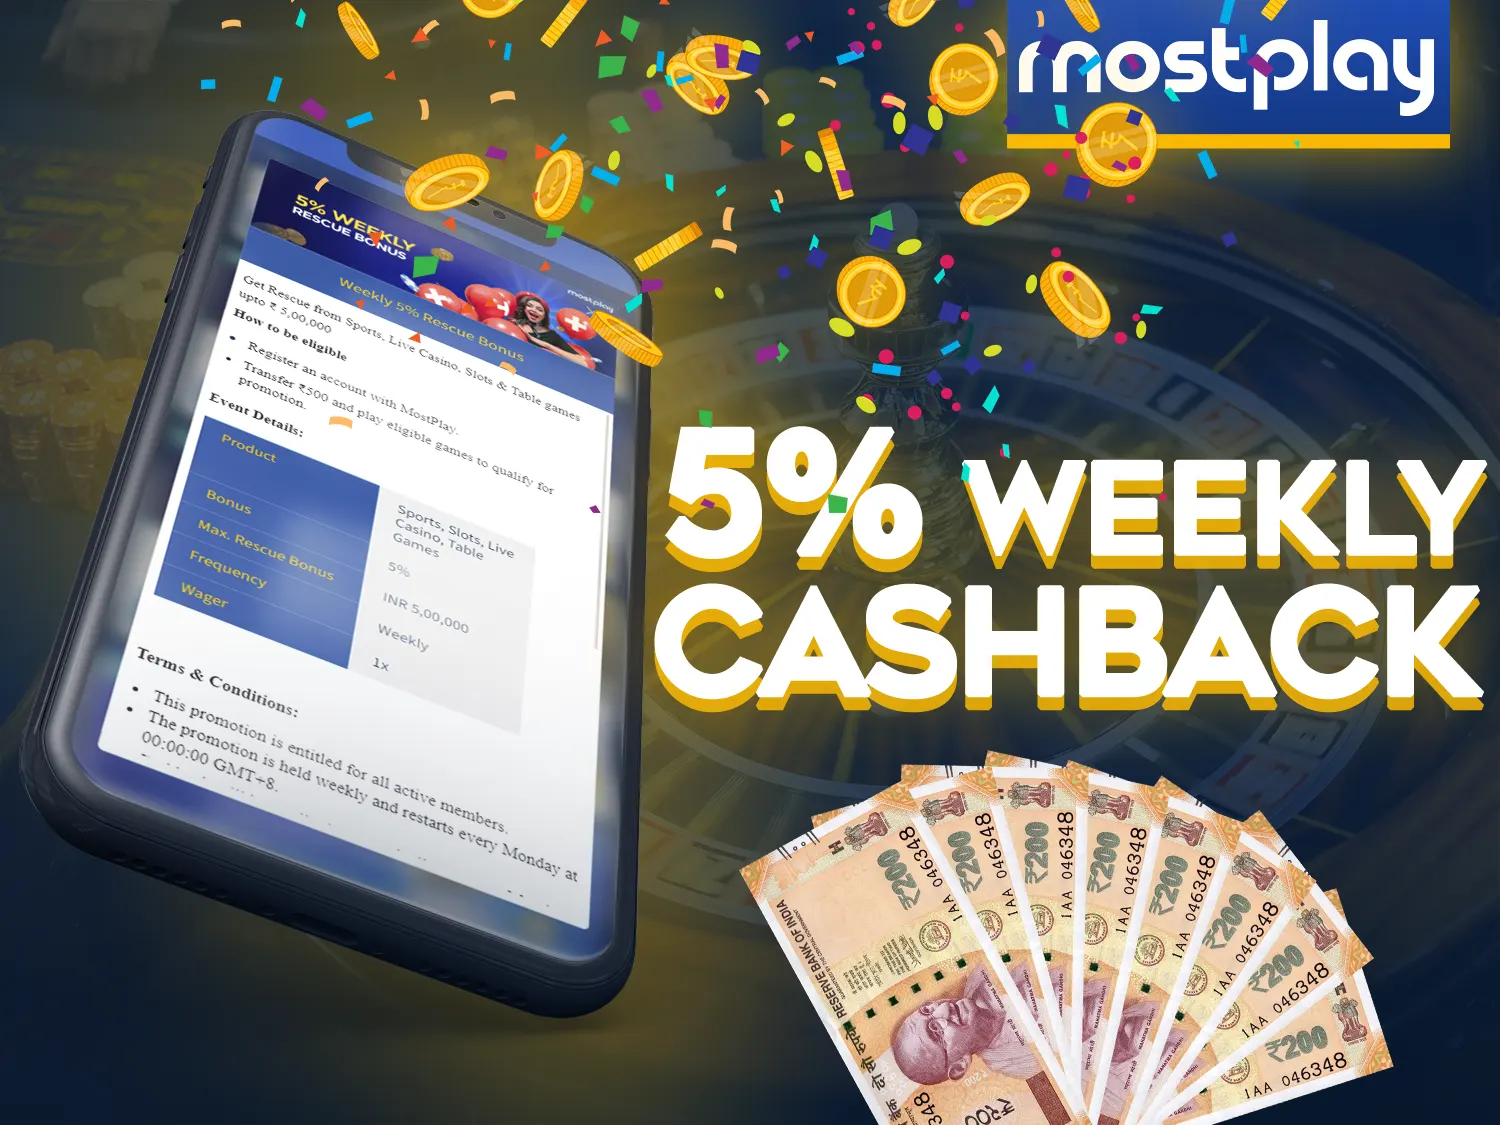 Get your money back after each deposit in the Mostplay app with a weekly cashback bonus.